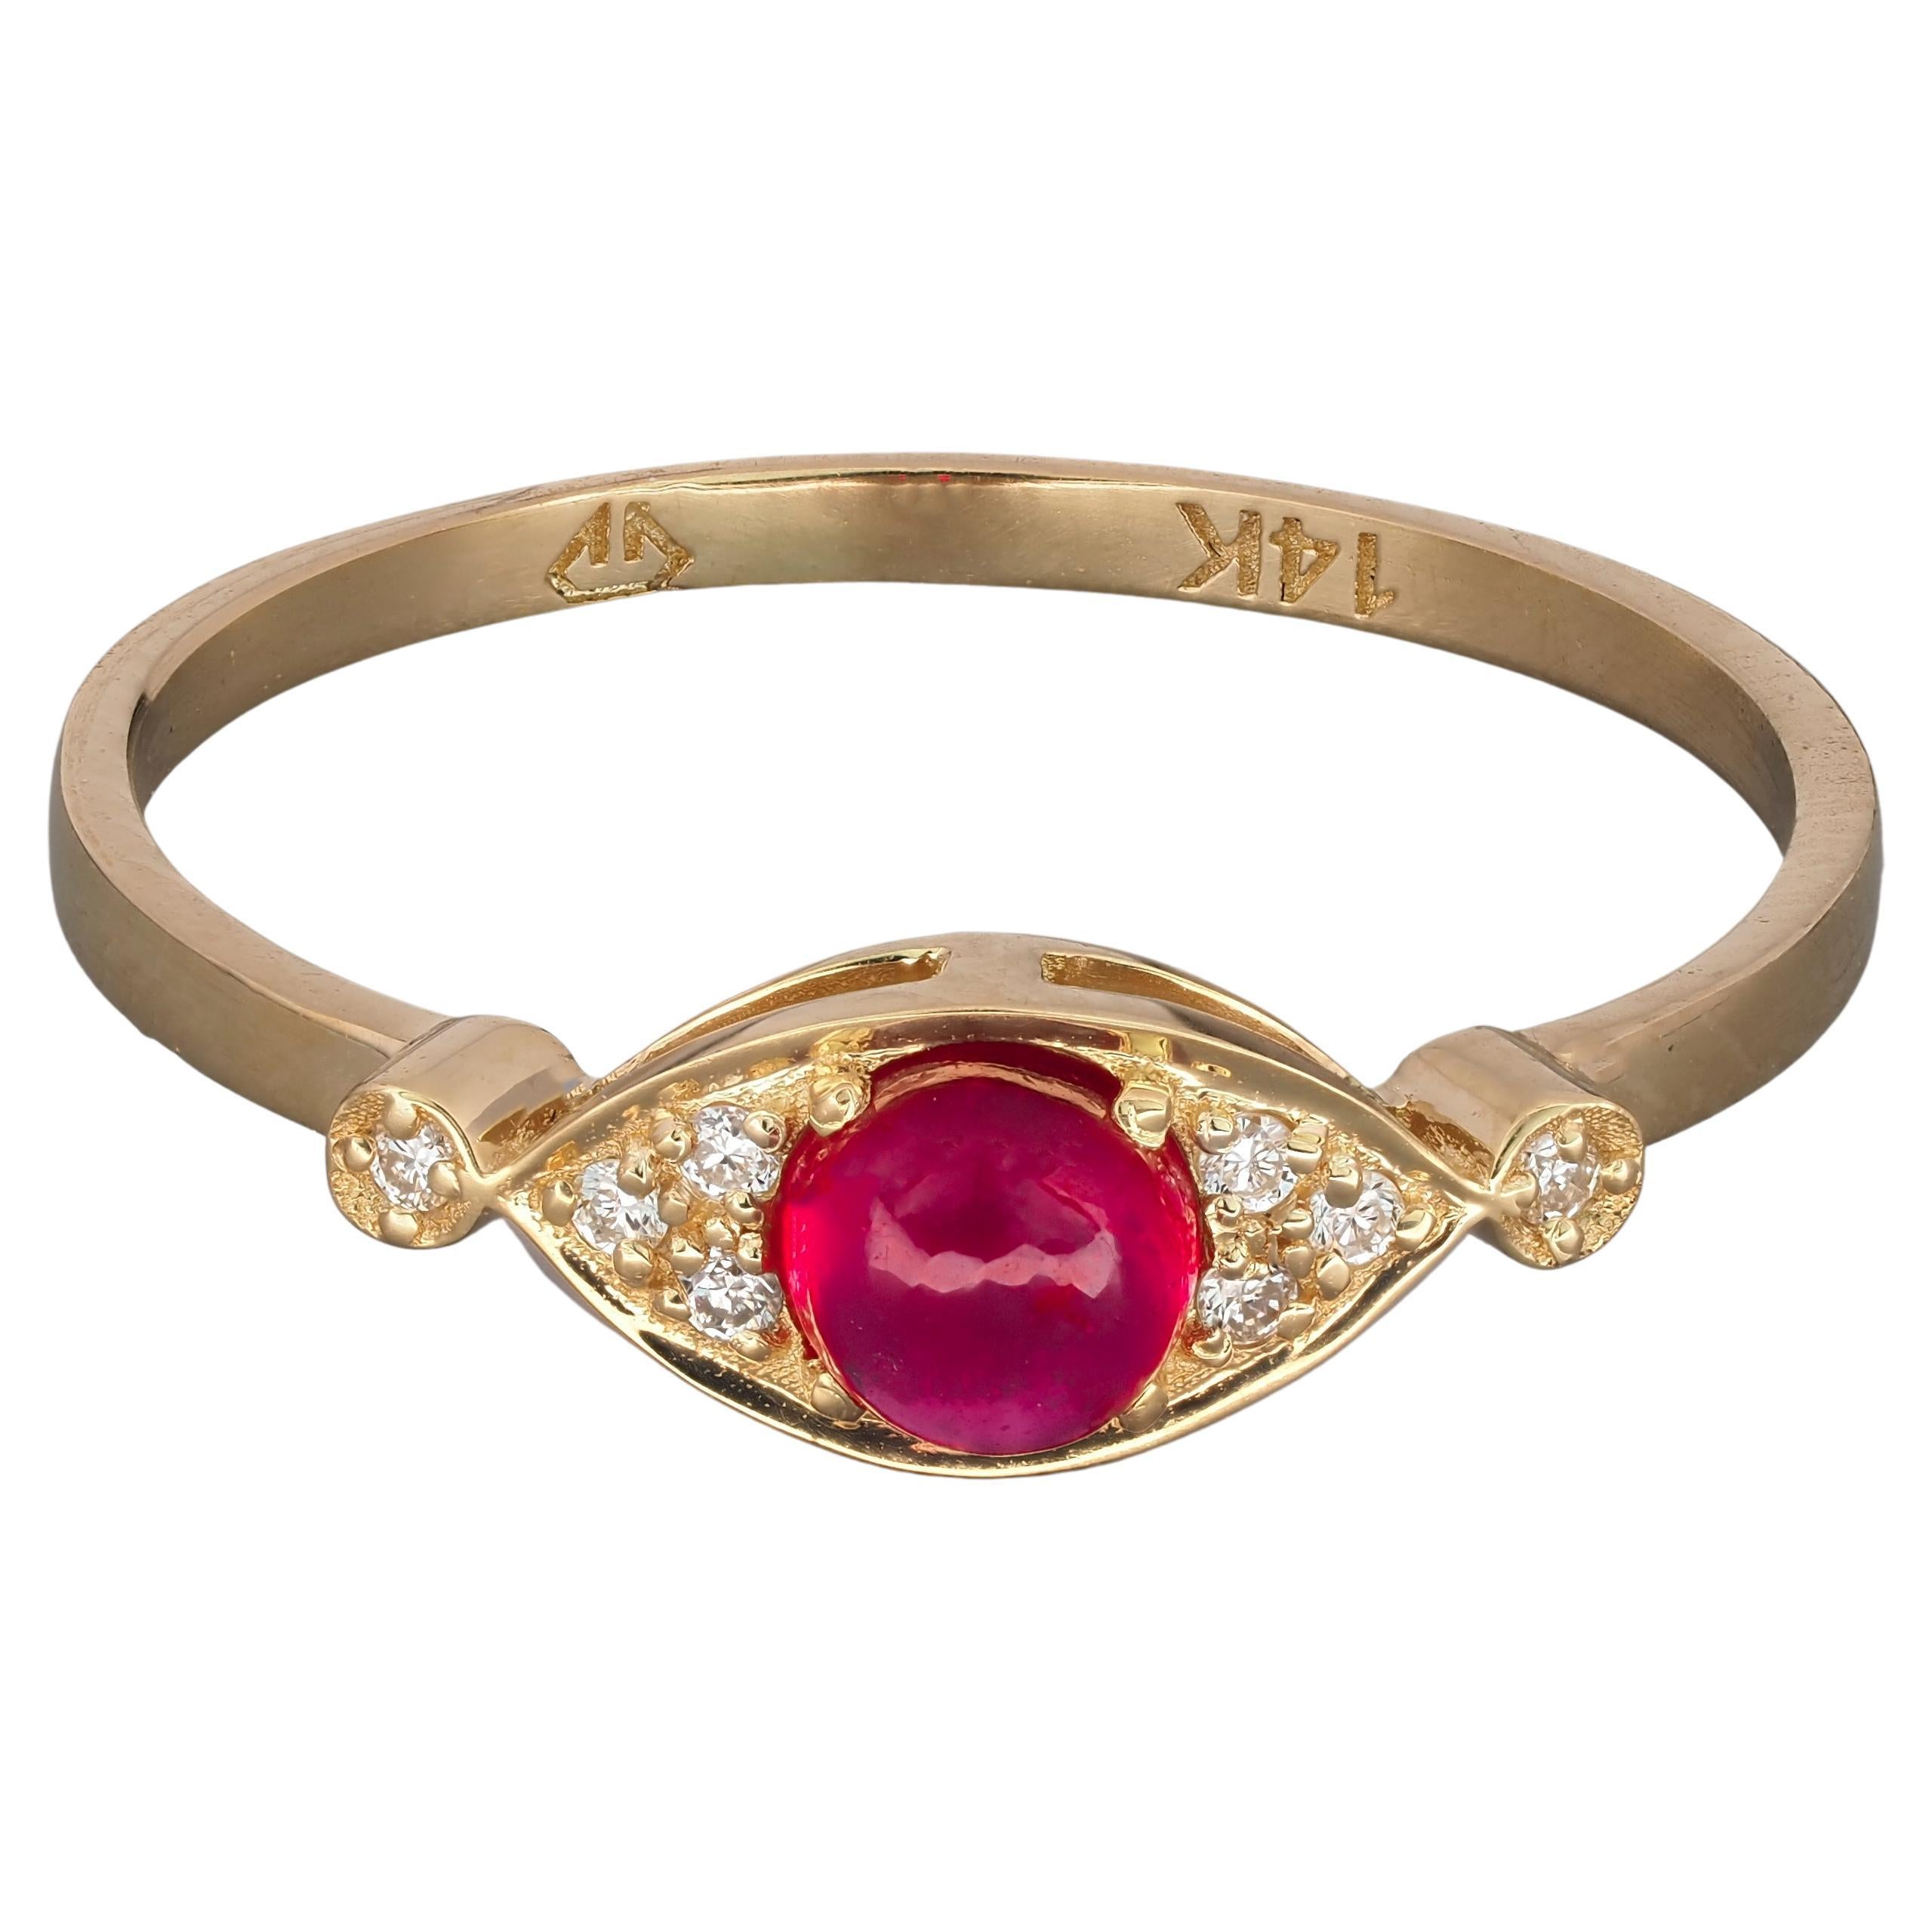 14k Gold Ring with Ruby and Diamonds, Gold Evil Eye Ring, Protection Ring